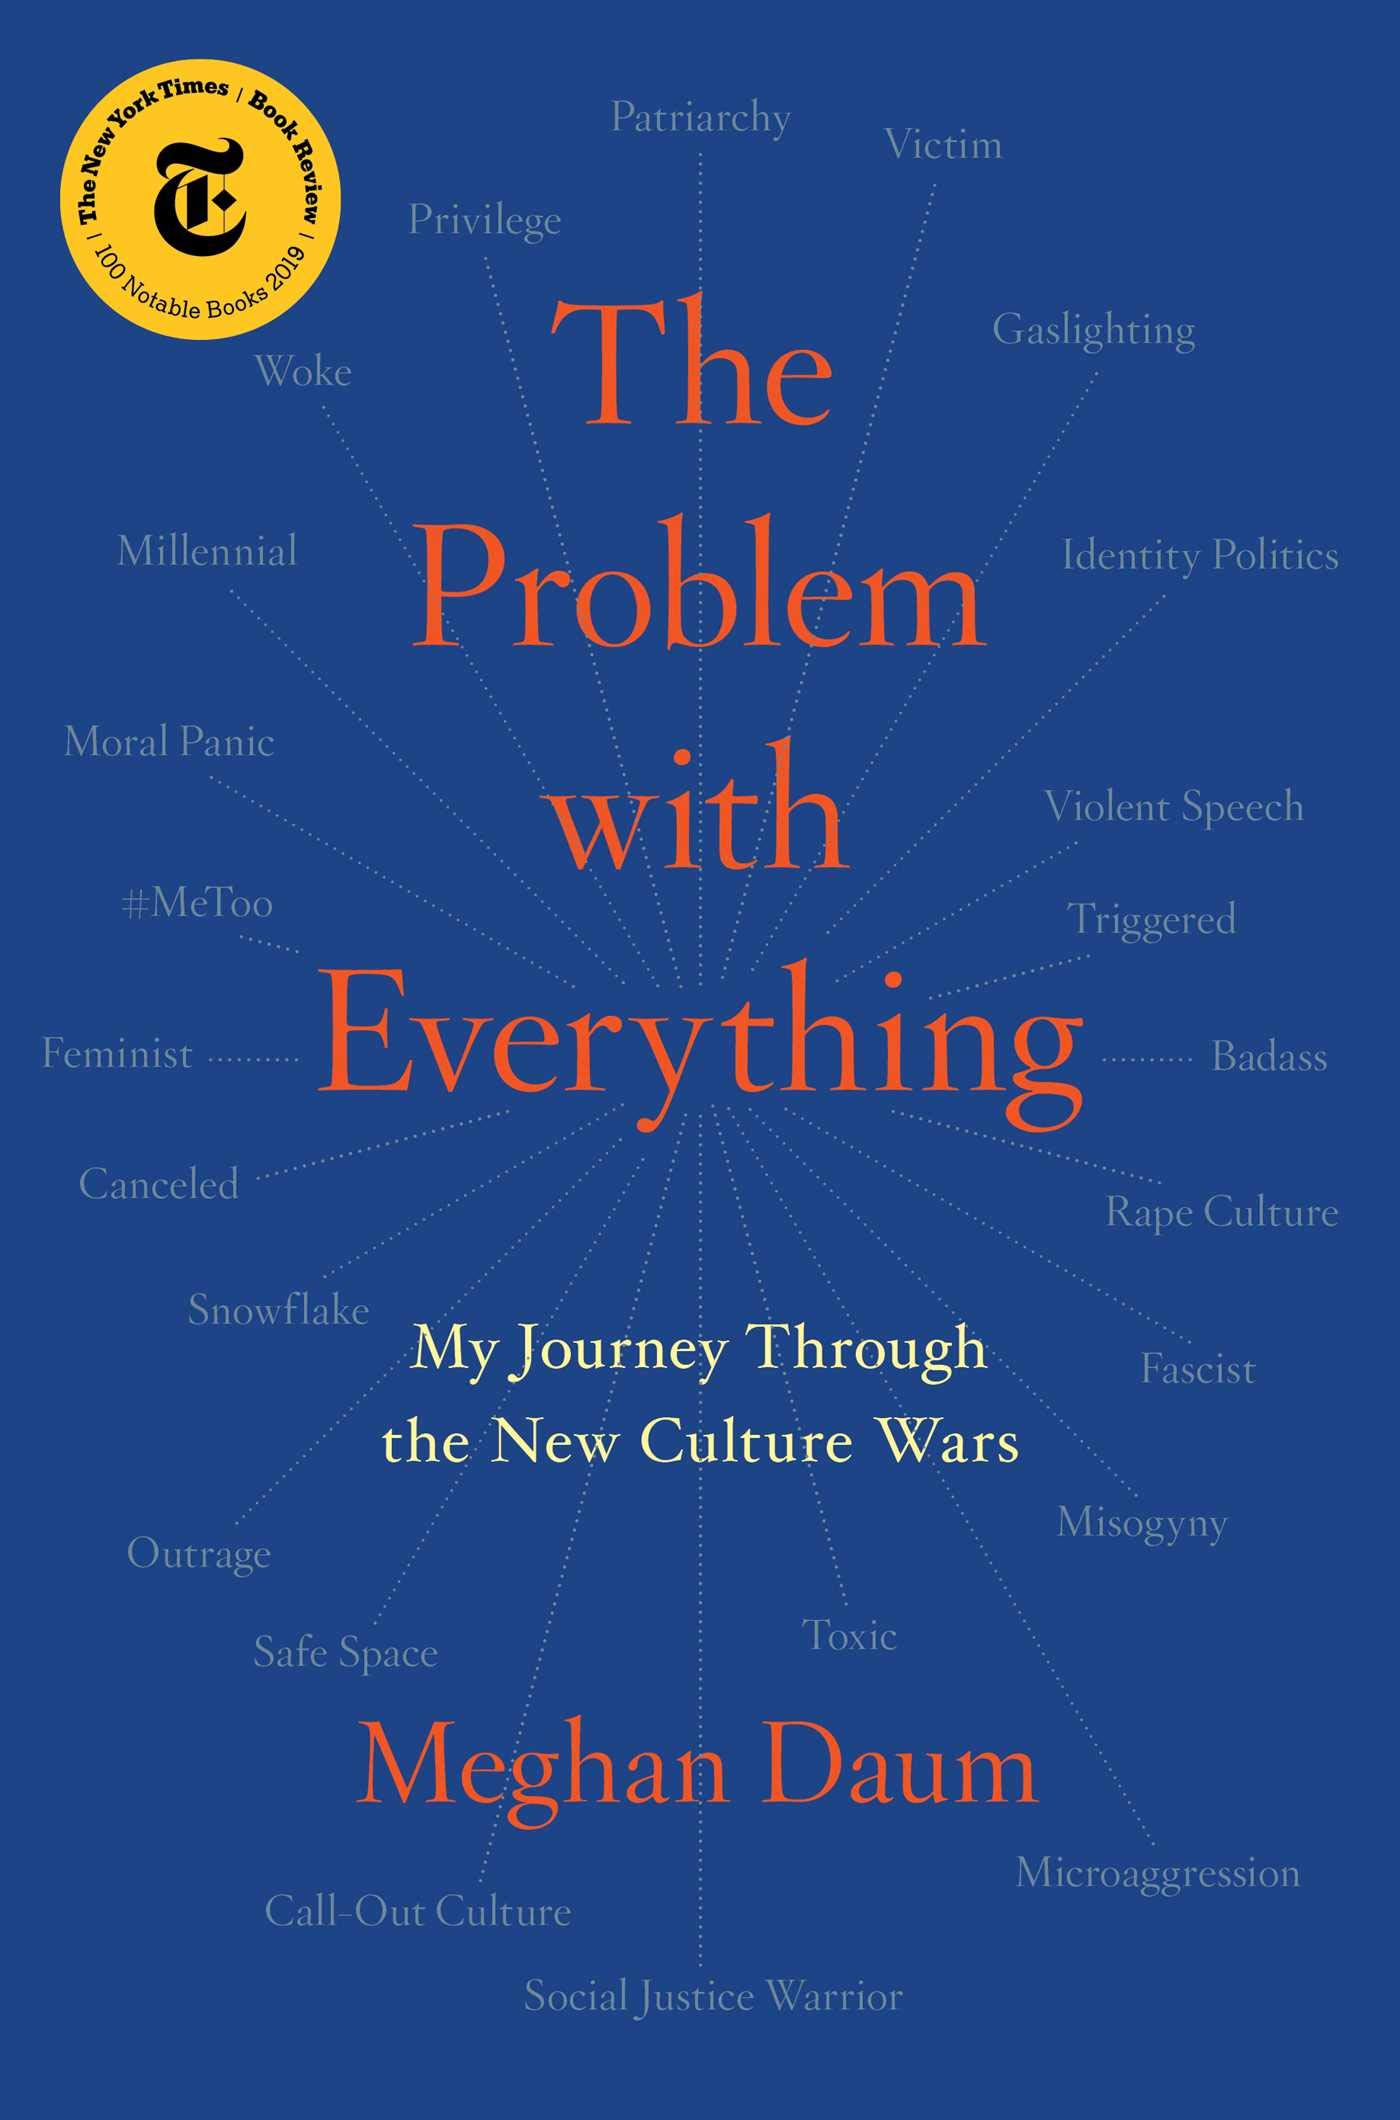 The cover of The Problem with Everything: My Journey Through the New Culture Wars